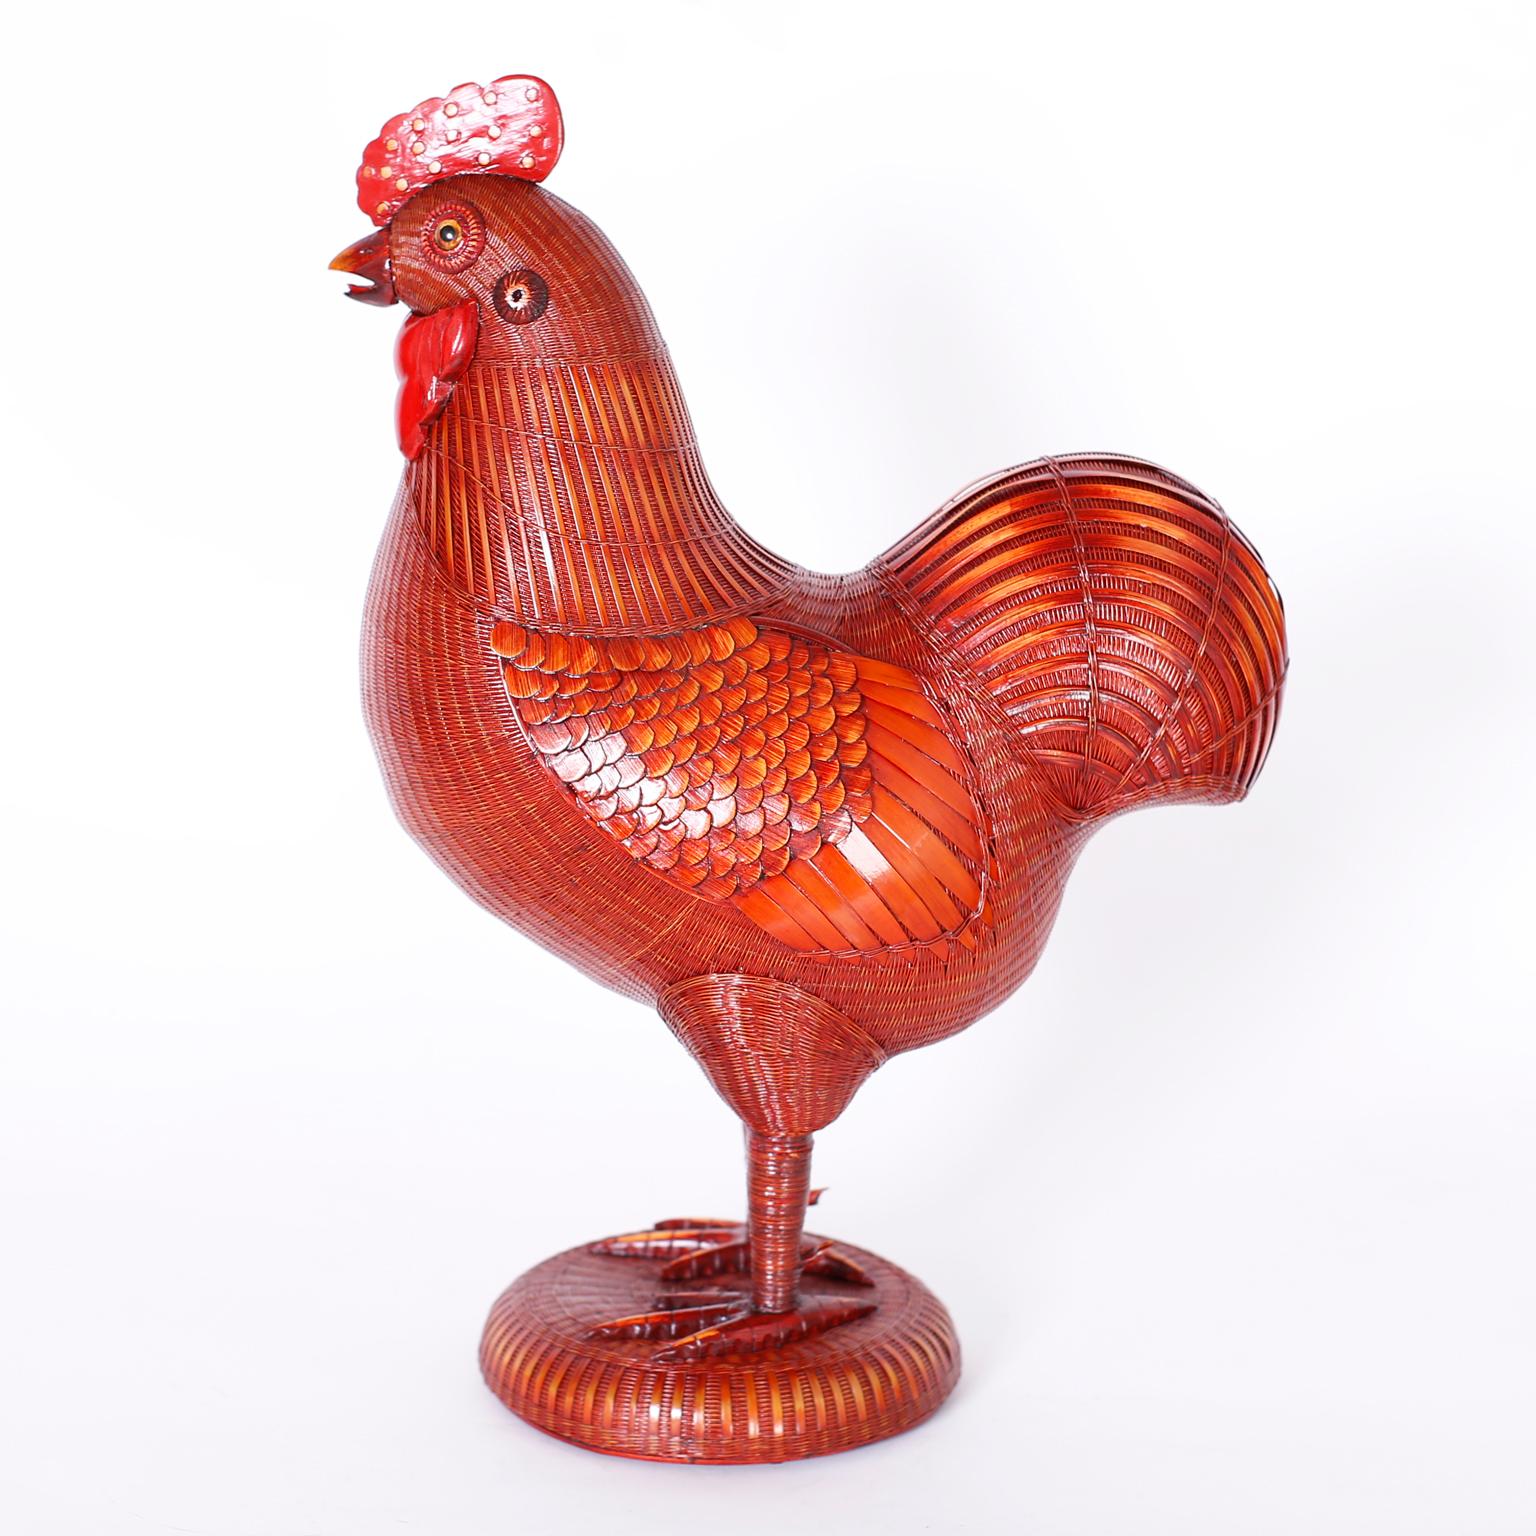 Chinese rooster expertly crafted with an ambitious weaving technique using bamboo and bamboo wicker with carved wood highlights, from the noted Shanghai collection.